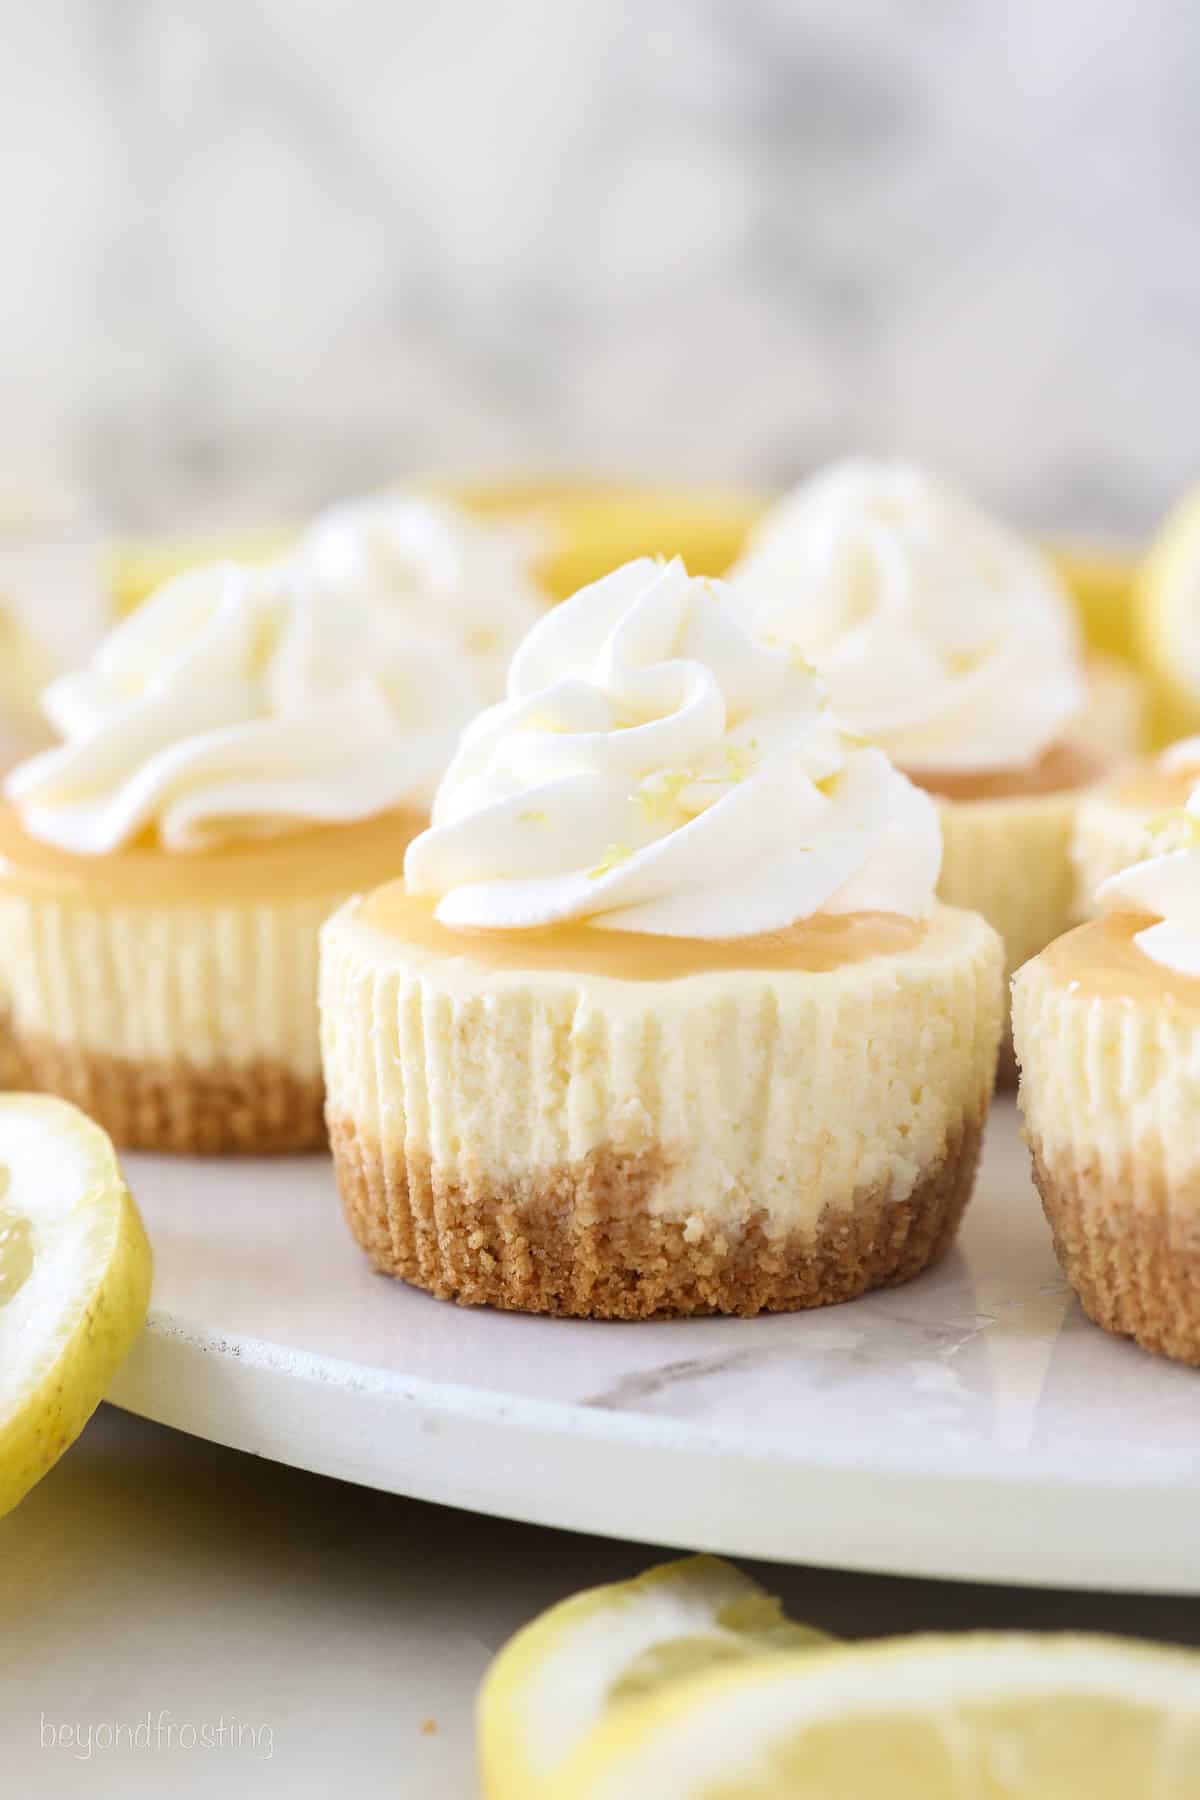 Mini lemon cheesecakes topped with whipped cream on a cake stand.